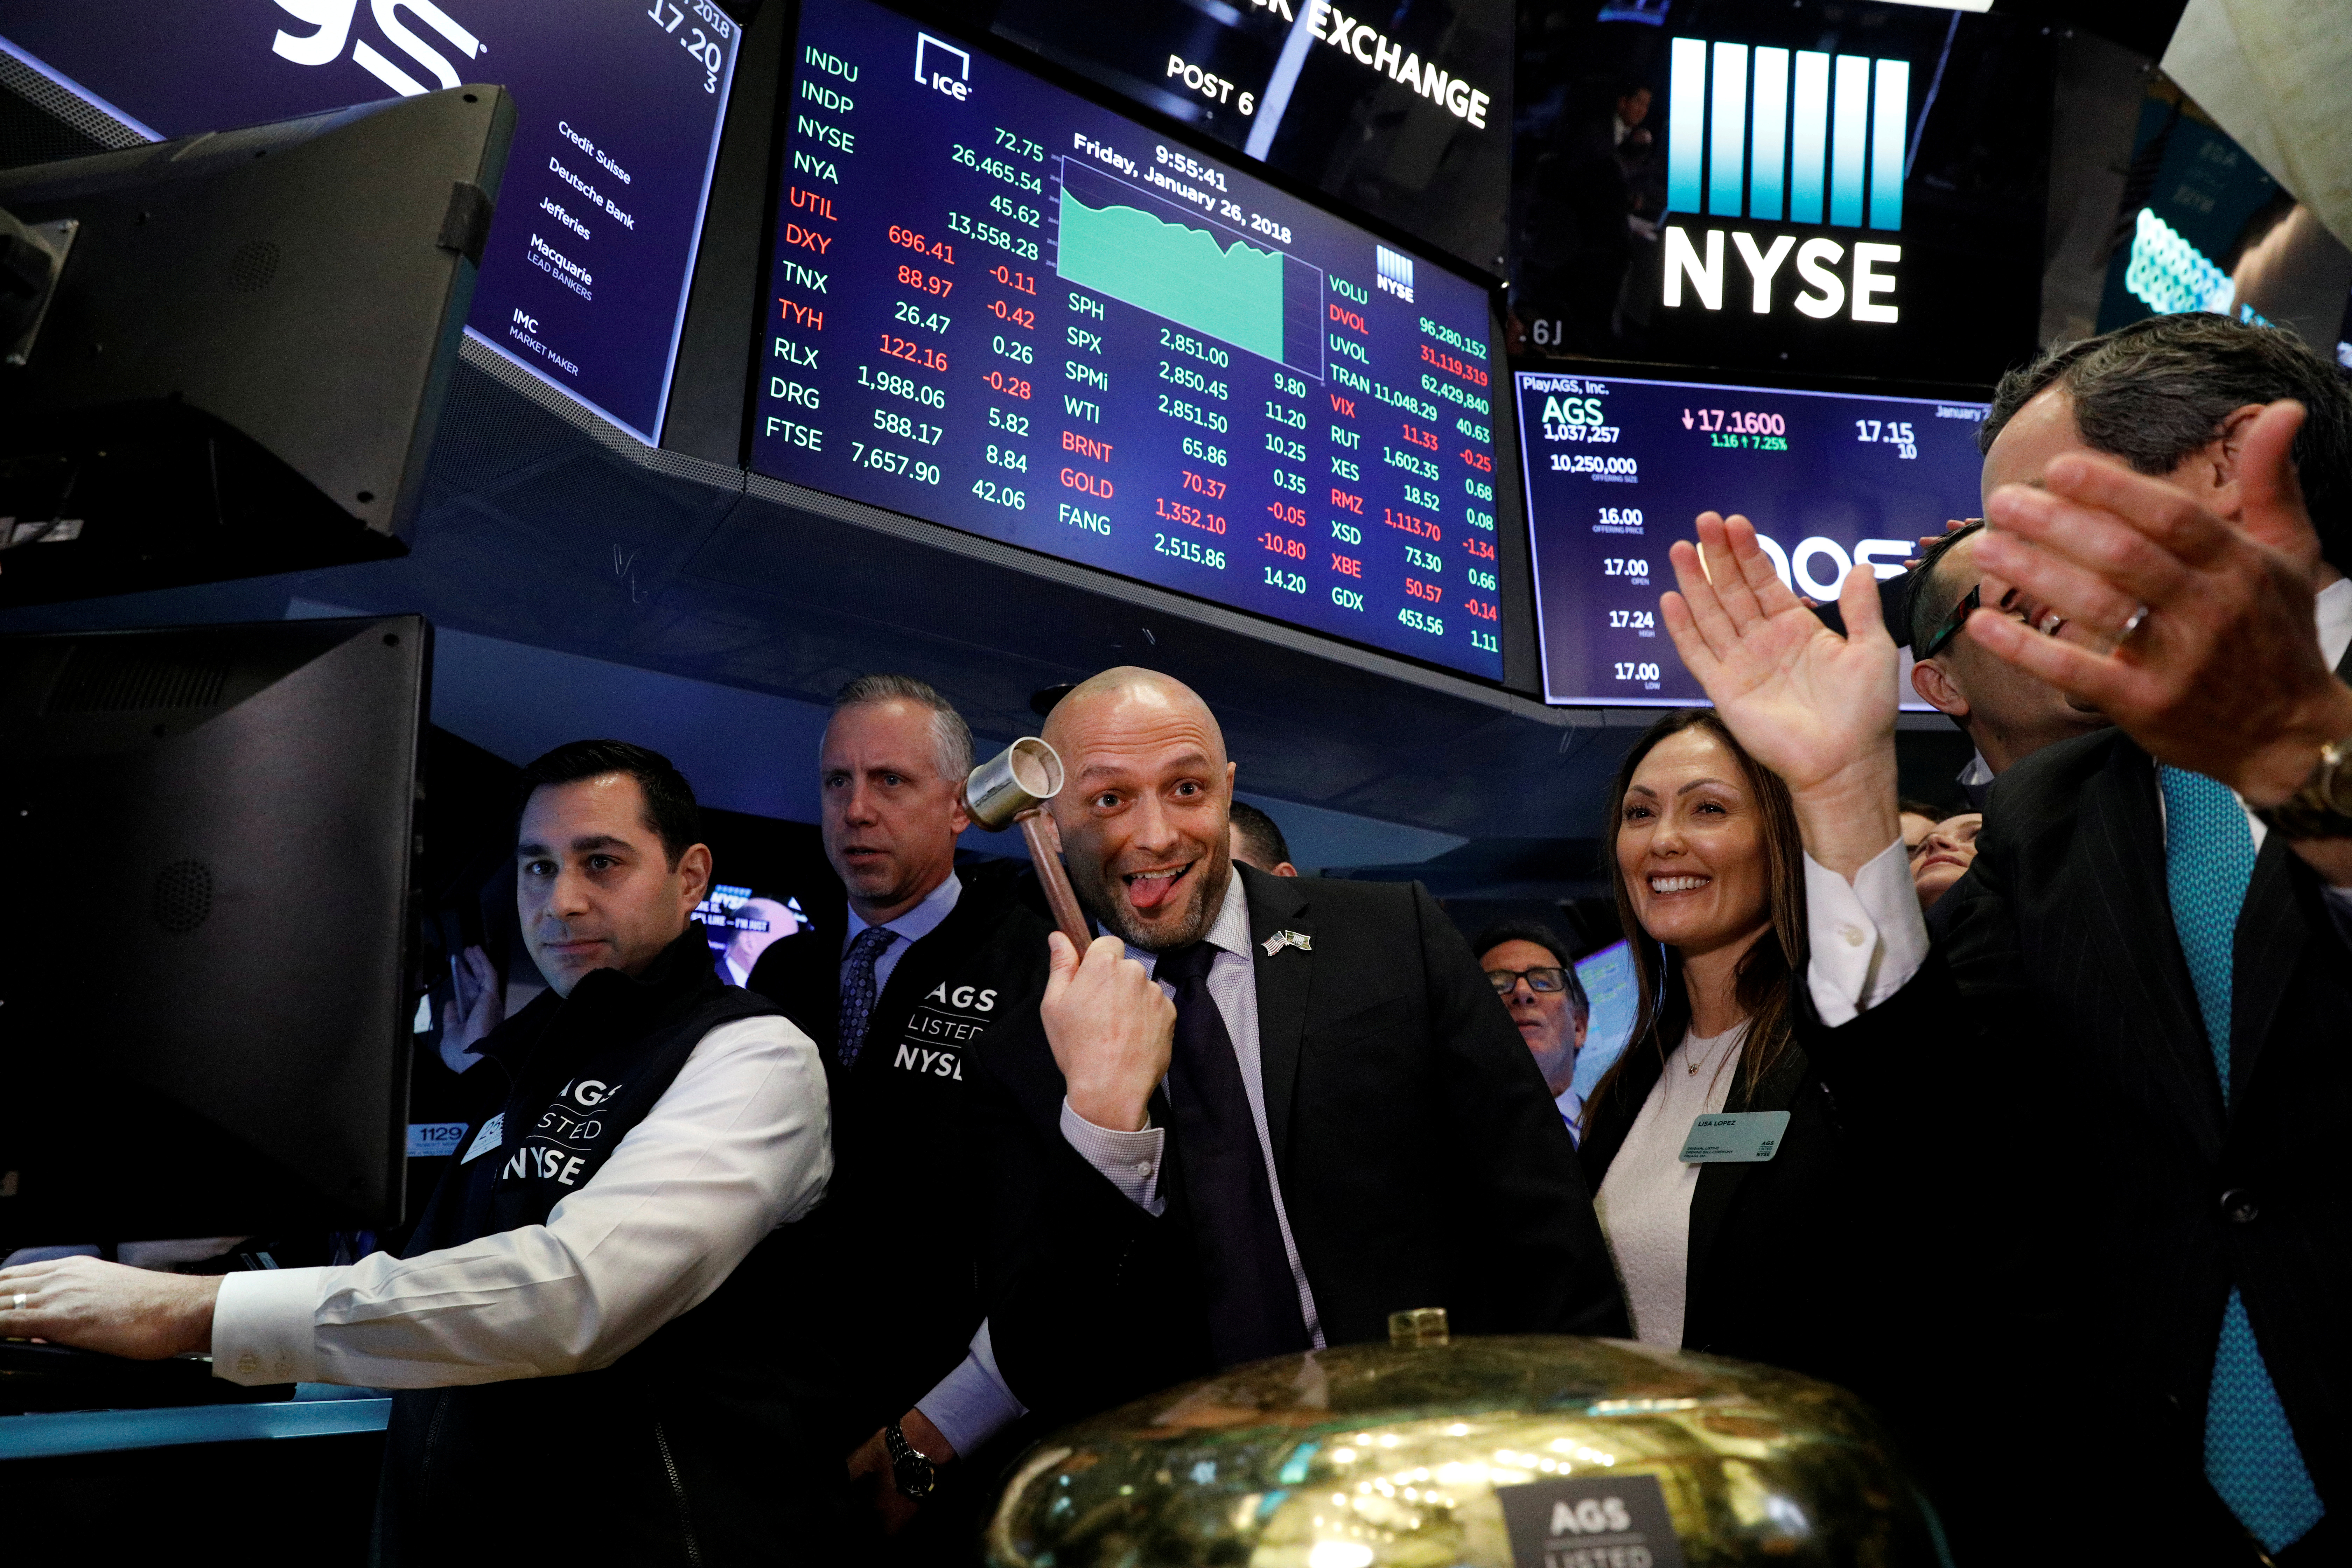 PlayAGS, Inc.'s President and CEO David Lopez celebrates his company's IPO on the floor of the New York Stock Exchange in New York